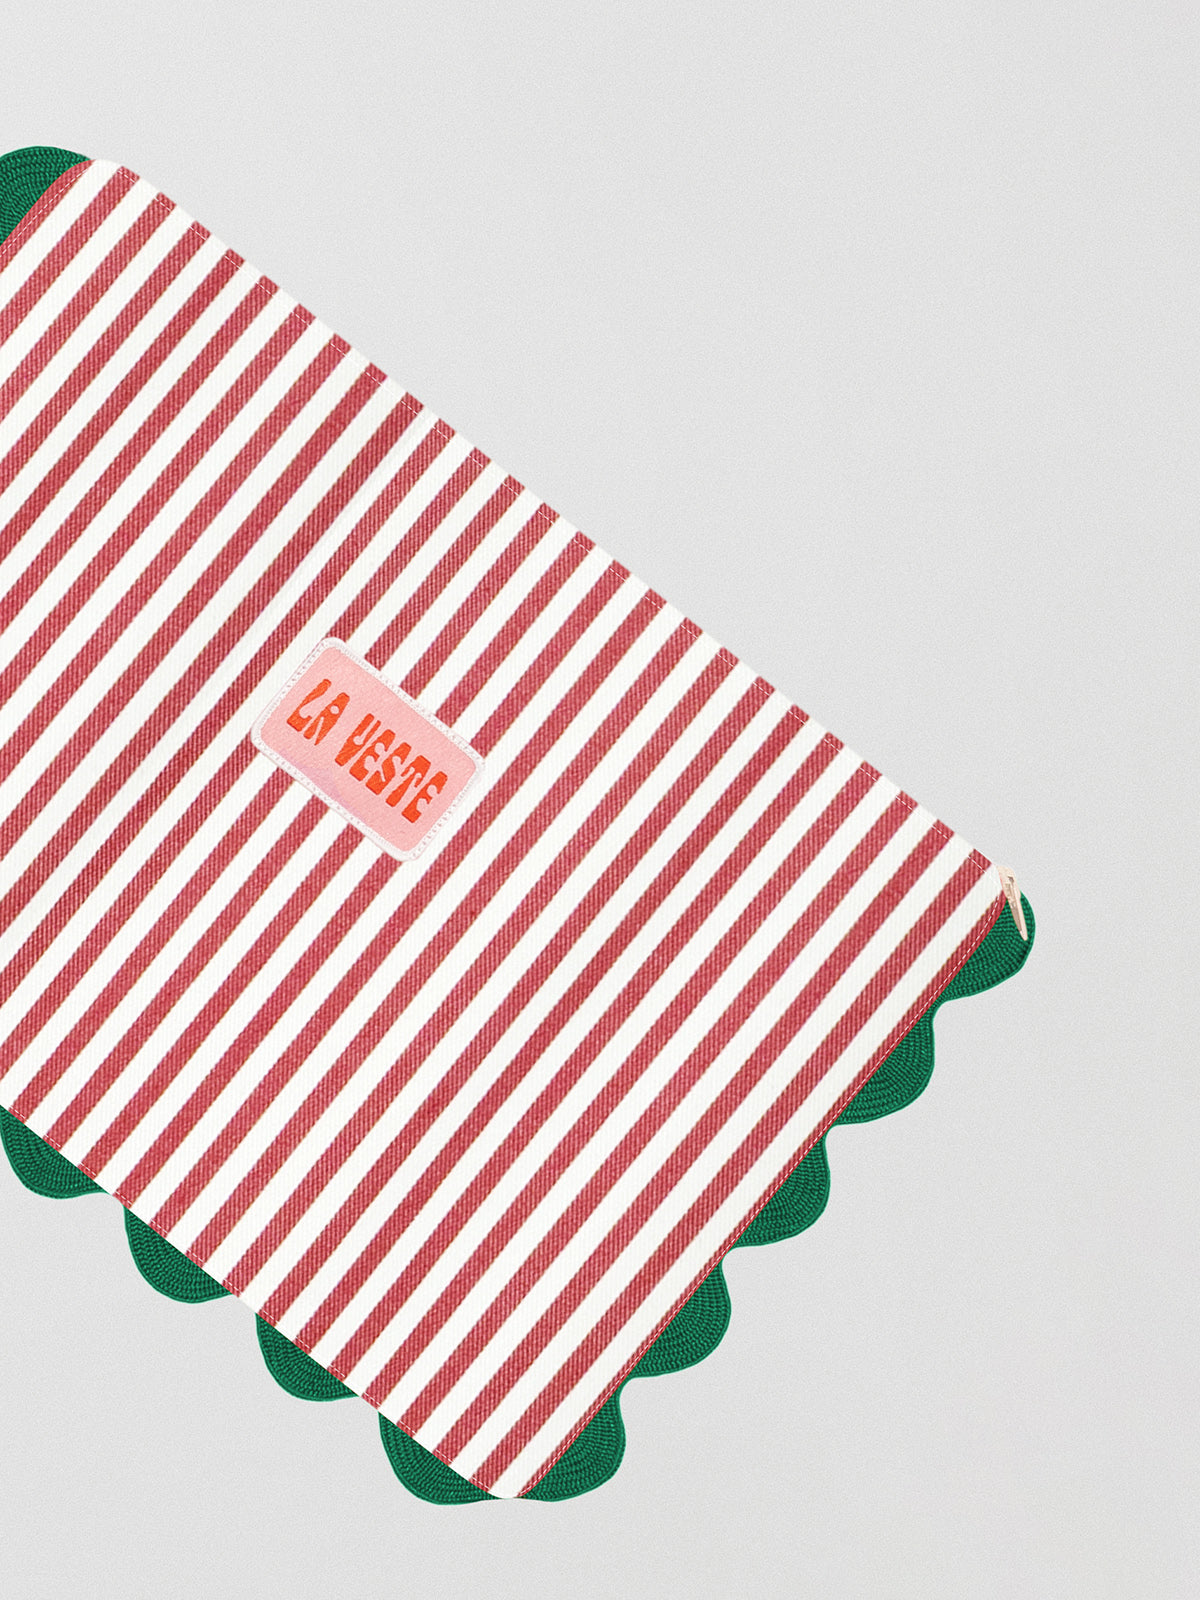 Red and white striped toiletry bag with zipper closure and green piping details all around the edge